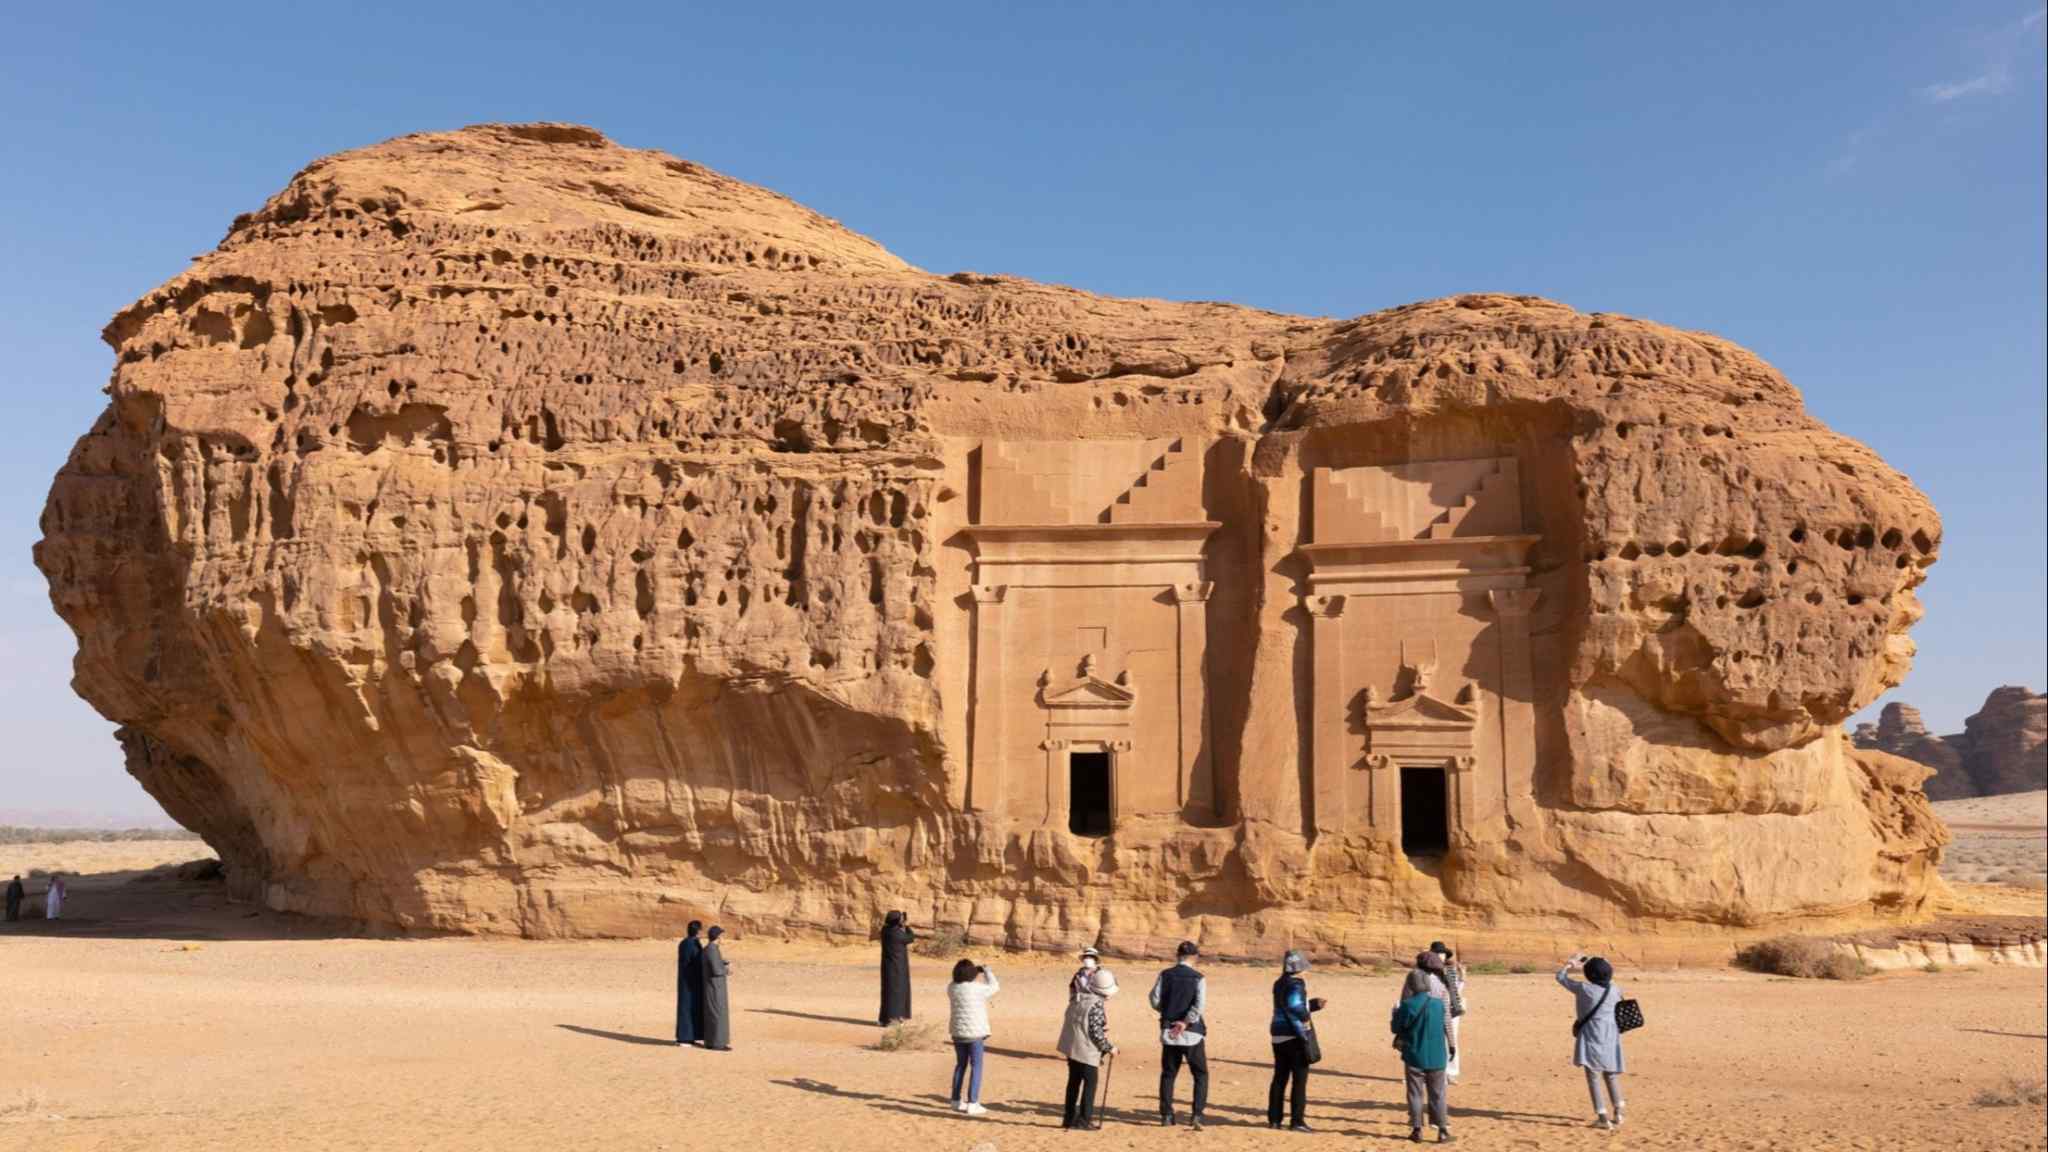 Saudi Arabia seeks a place on tourist map with ambitious foreign visitor push